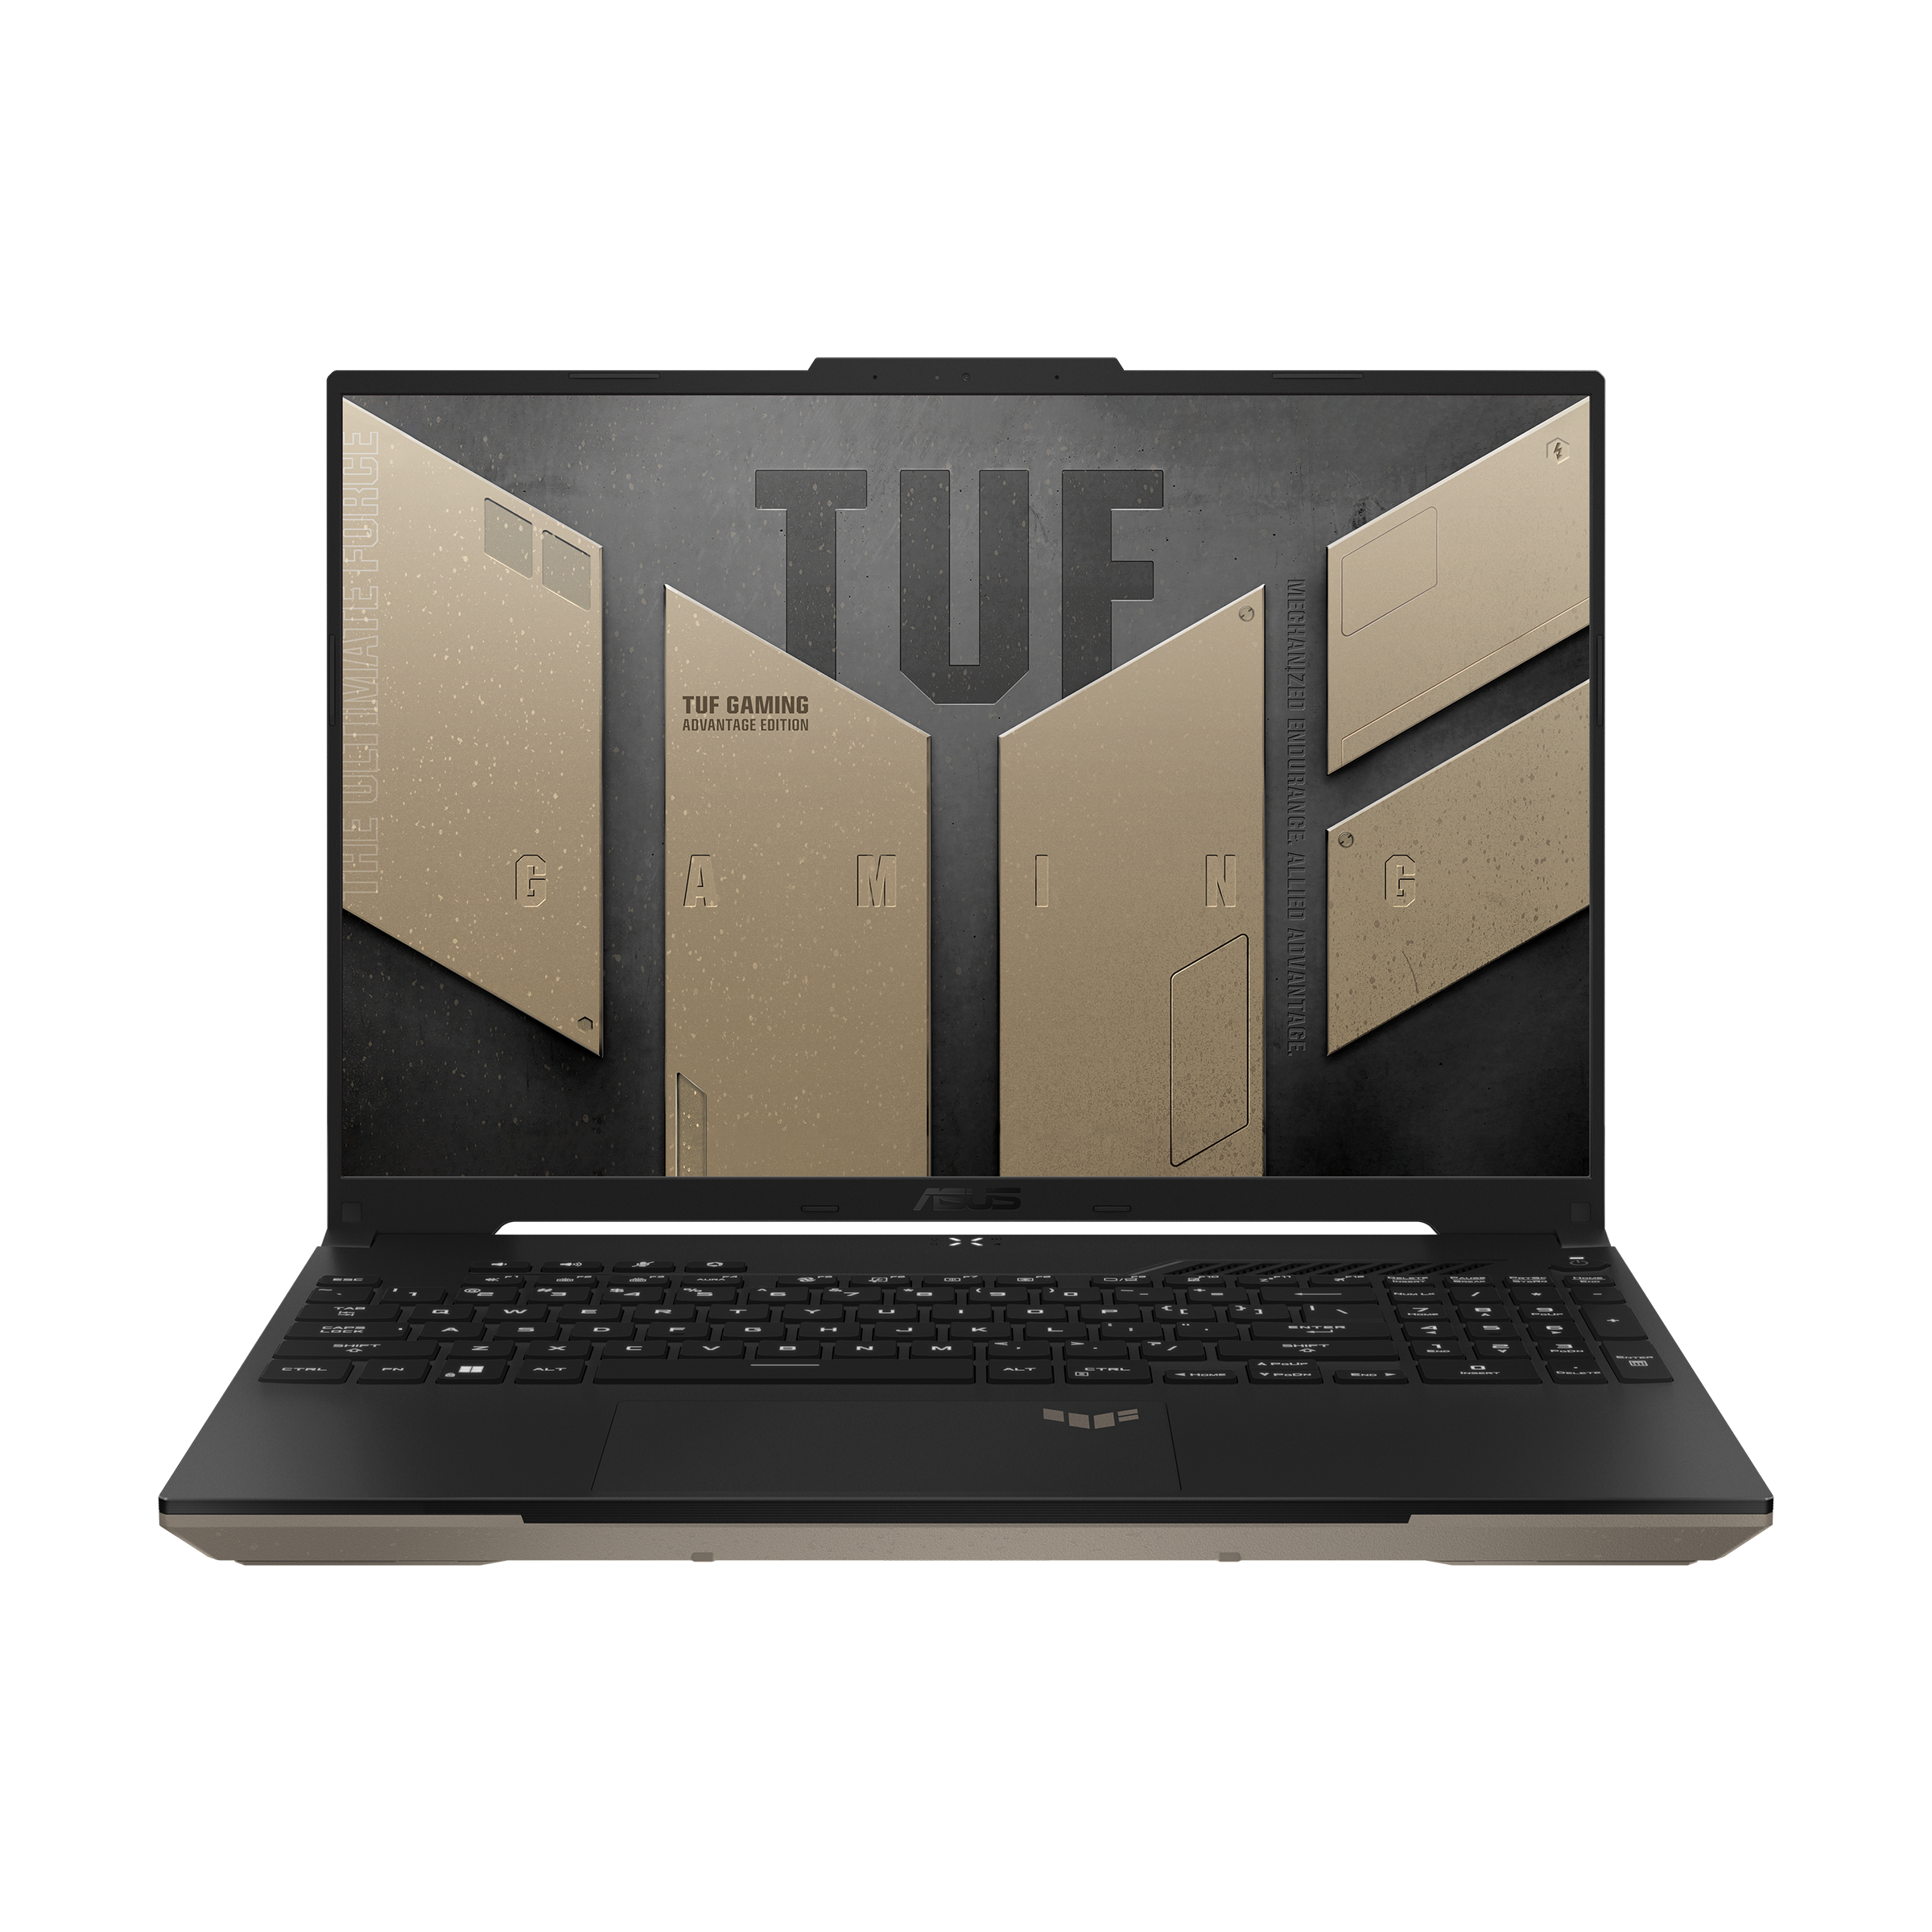 Asus TUF Gaming Laptops - All Variants Explained with Details 